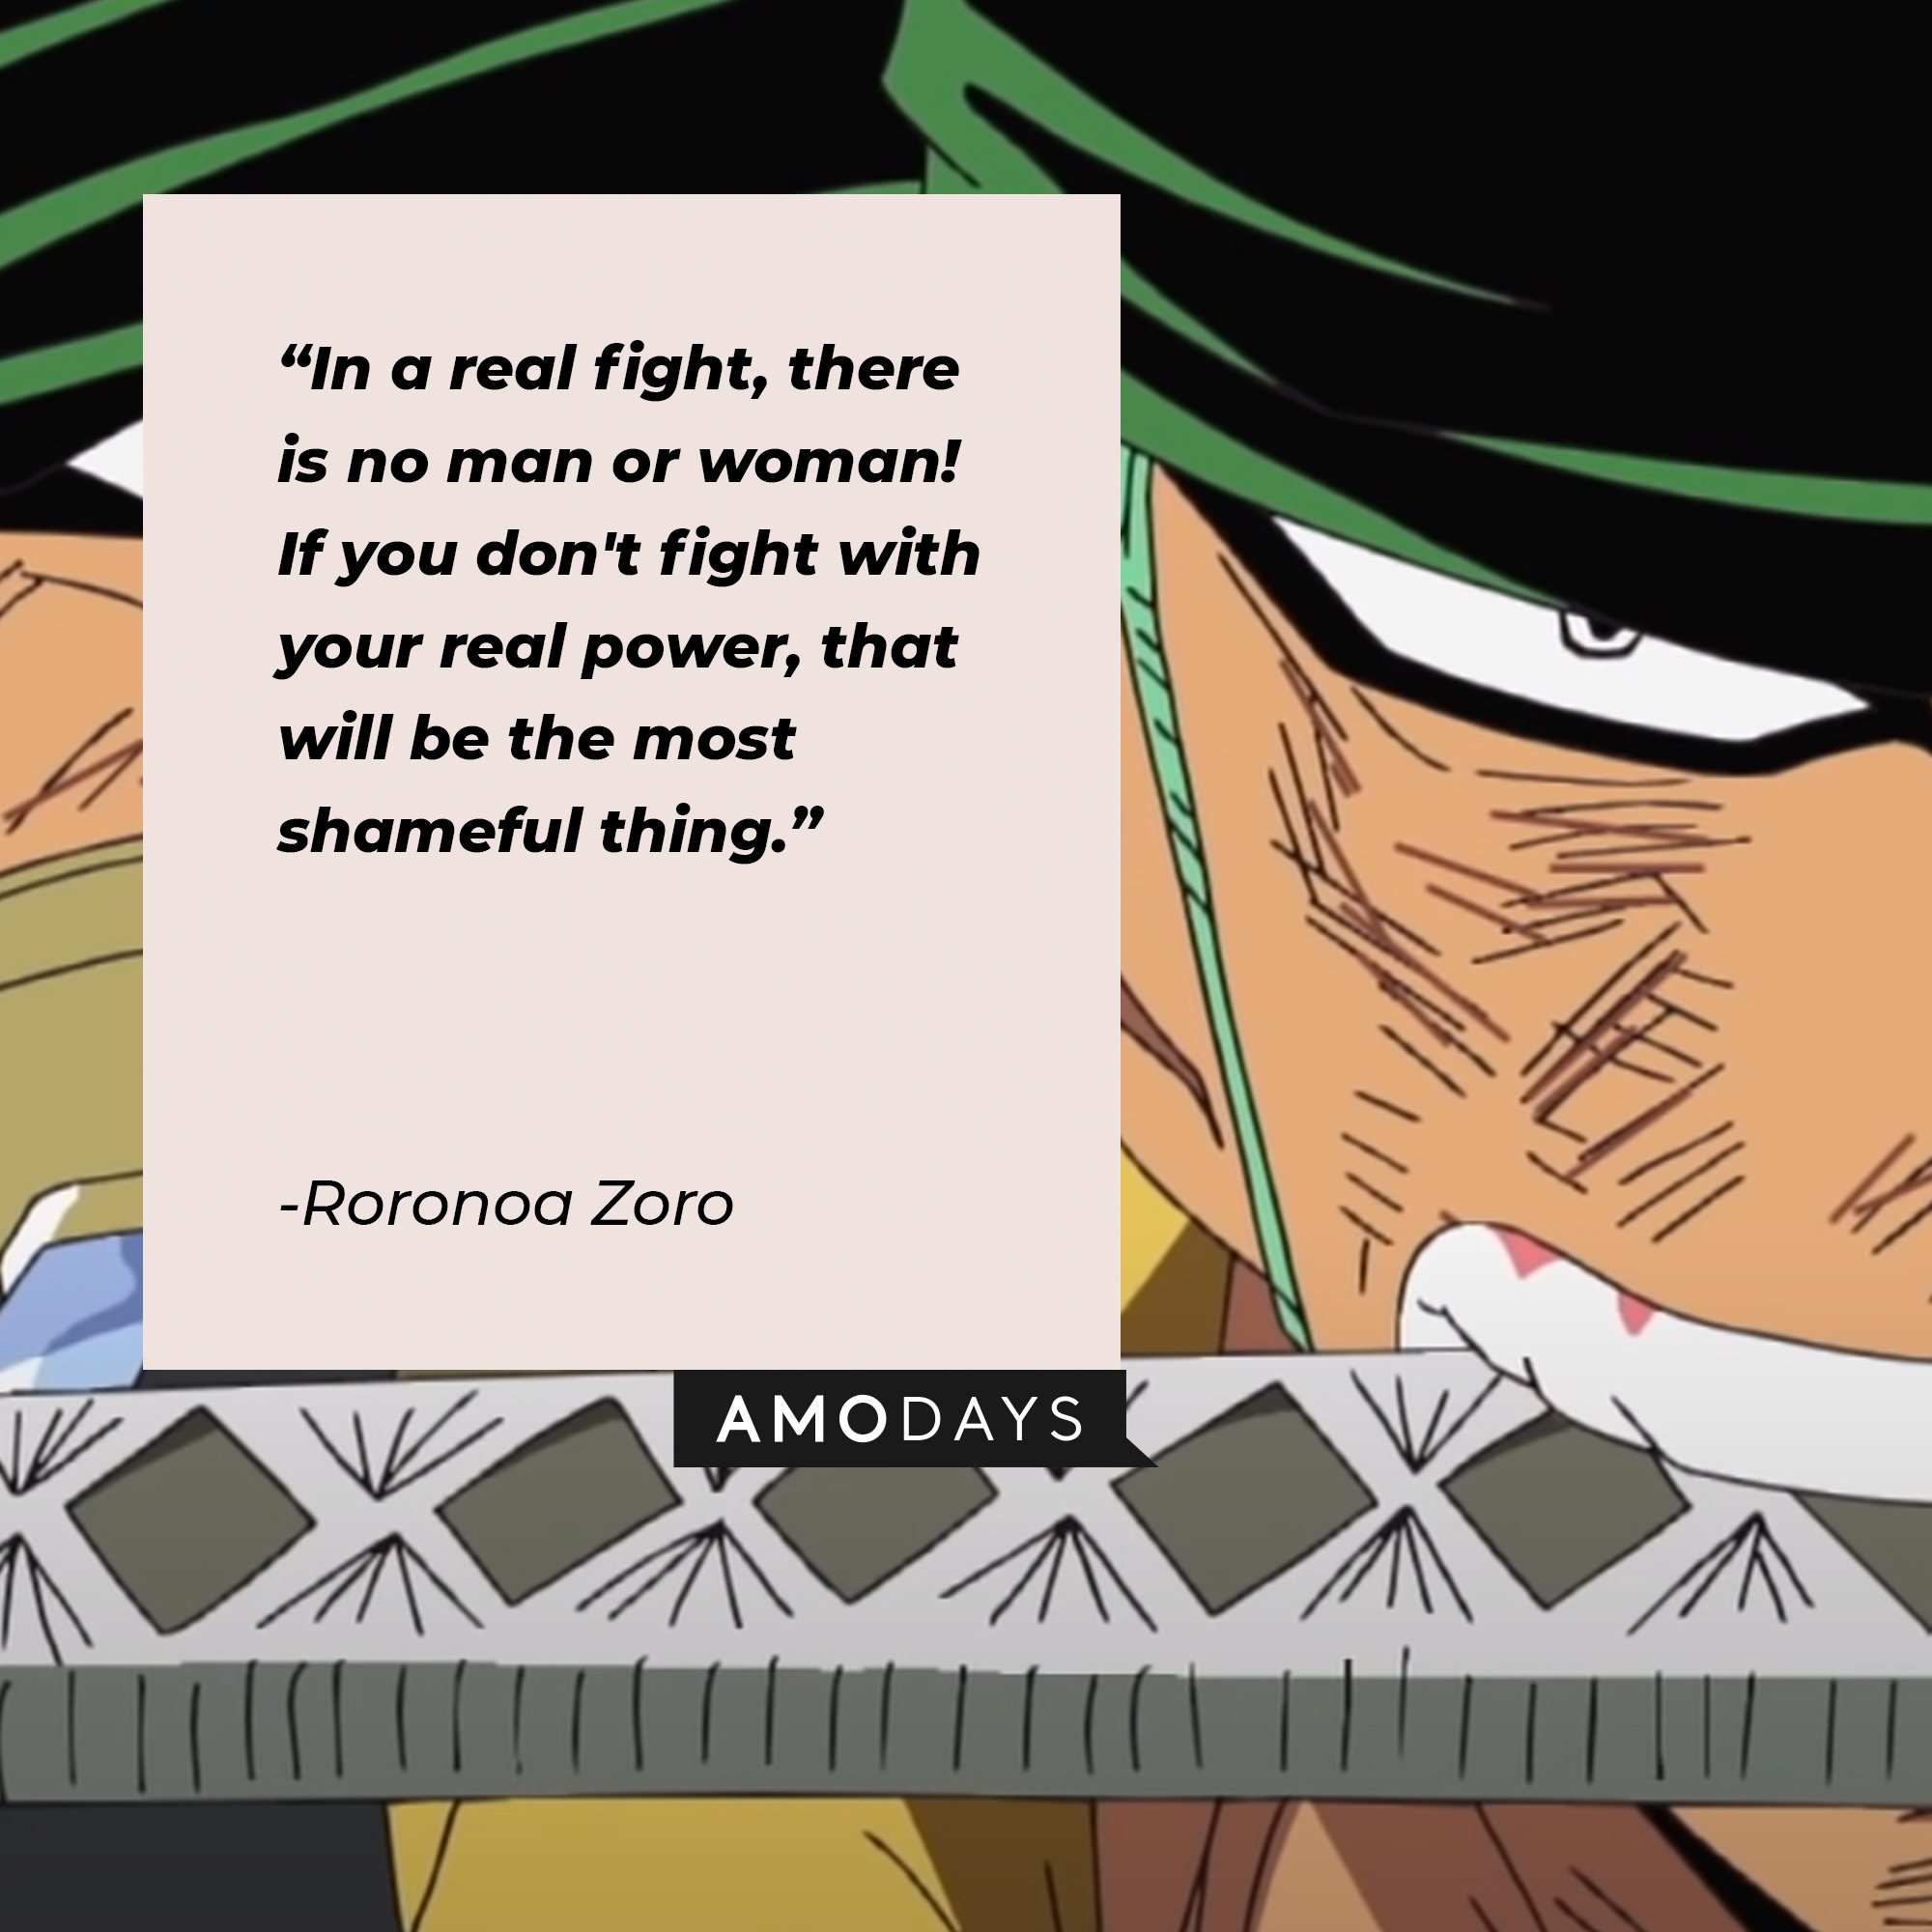 Roronoa Zoro’s quote: "In a real fight, there is no man or woman! If you don't fight with your real power, that will be the most shameful thing.” | Image: AmoDays